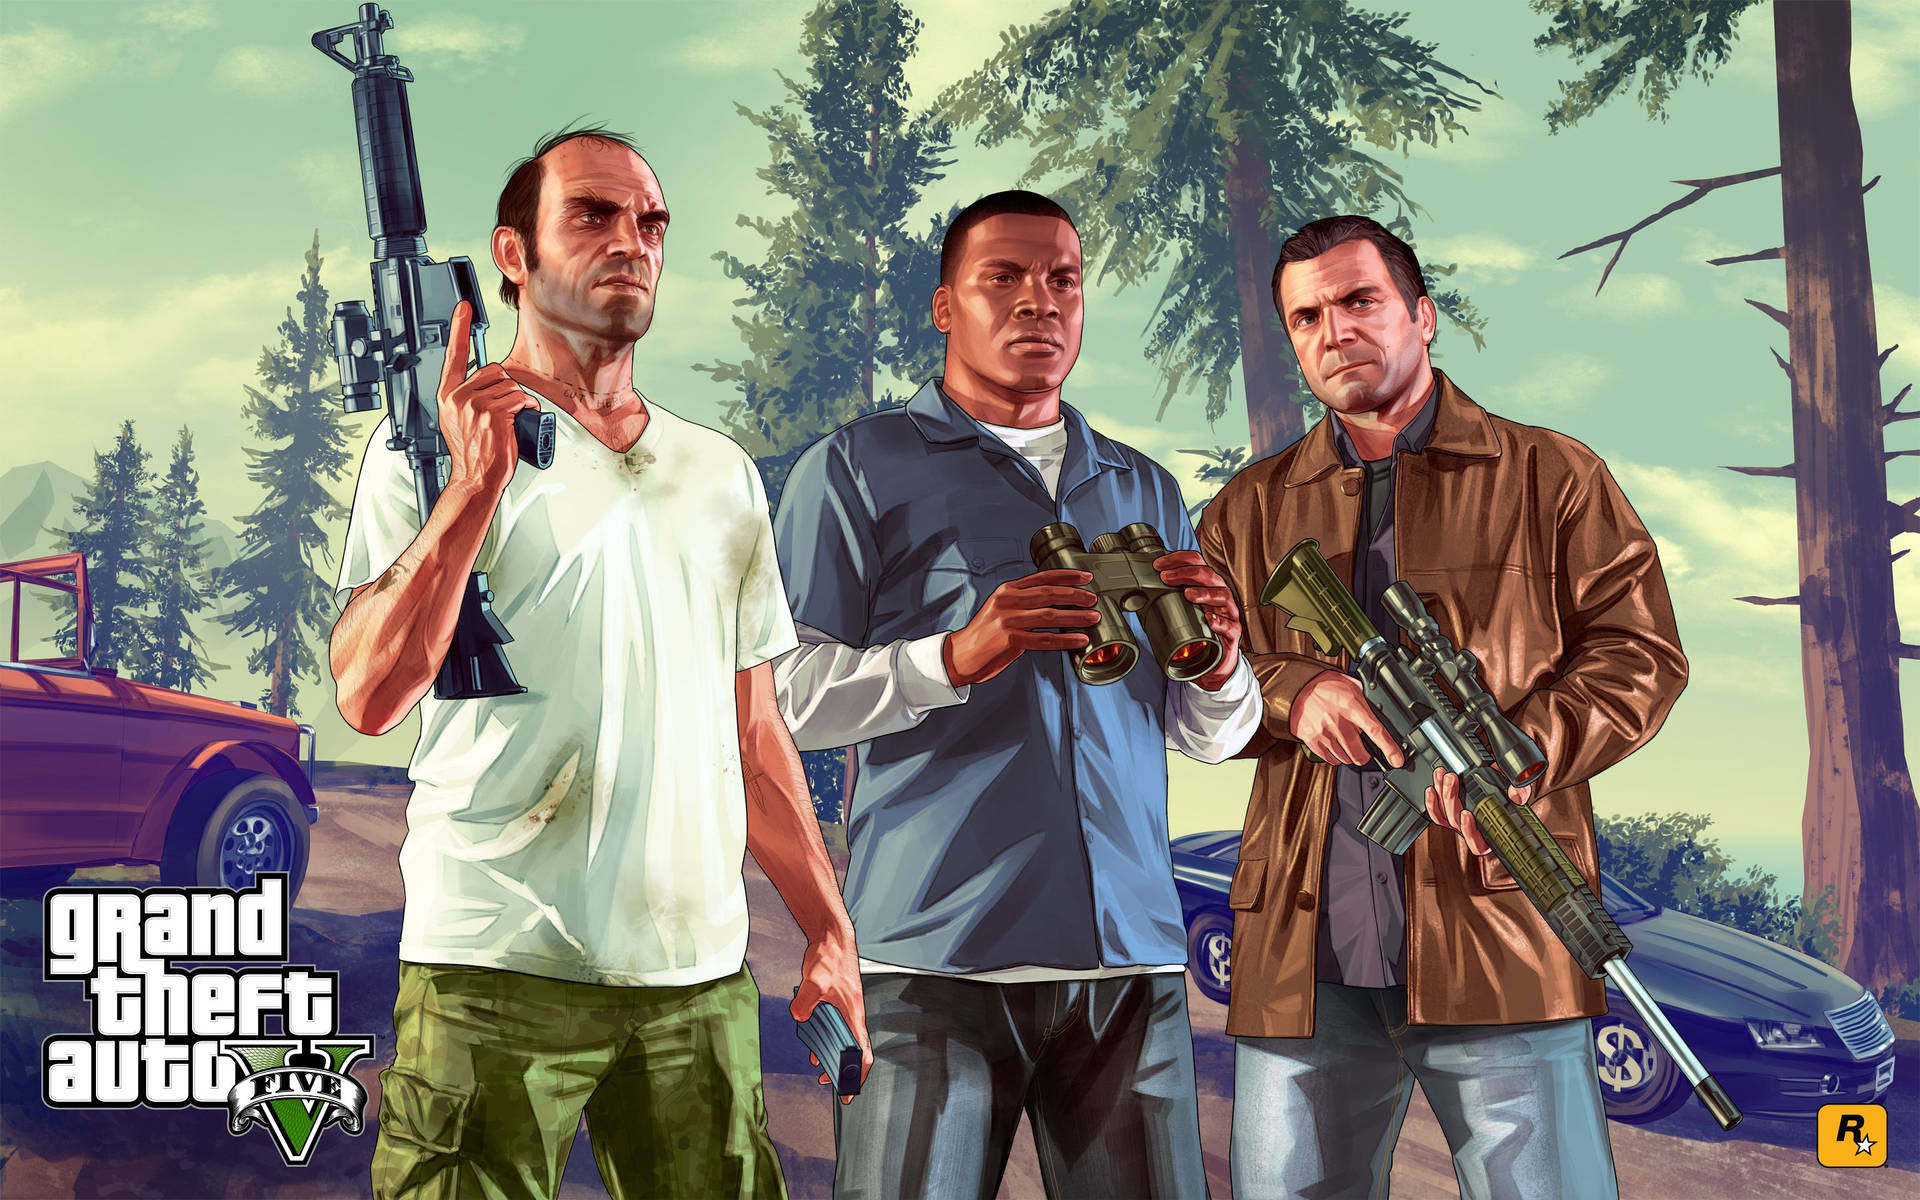 Enjoy Grand Theft Auto V on your iPhone Wallpaper